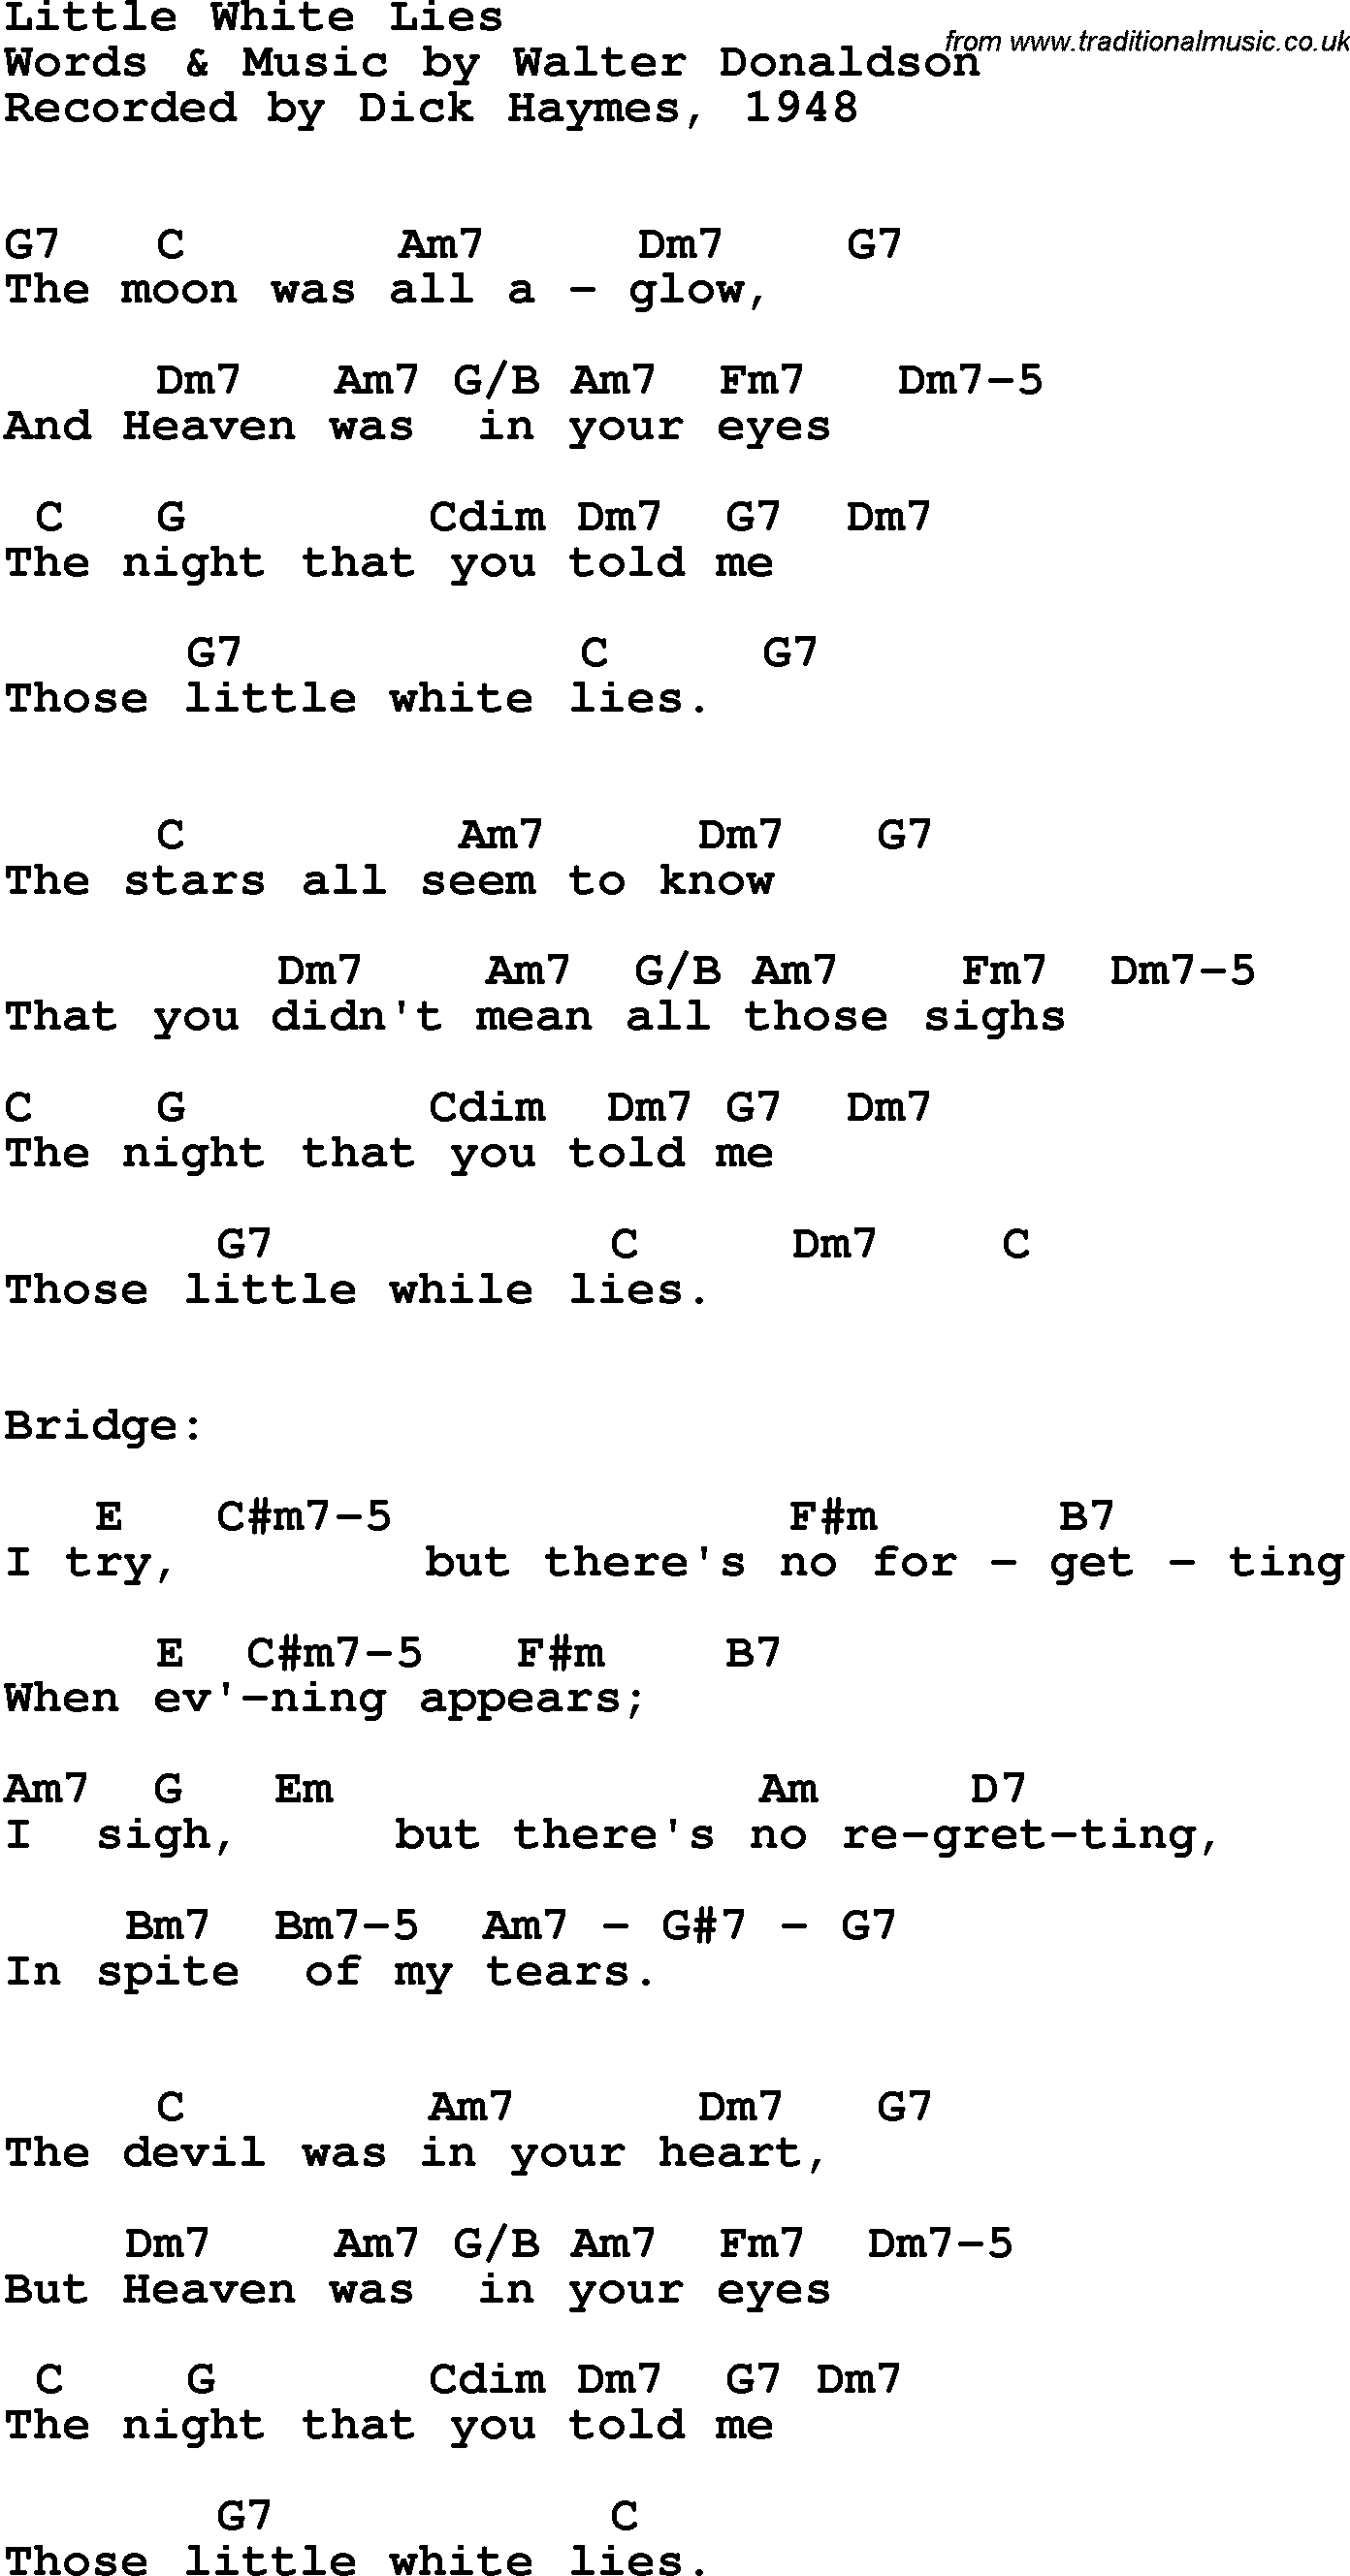 Song Lyrics with guitar chords for Little White Lies - Dick Haymes, 1948